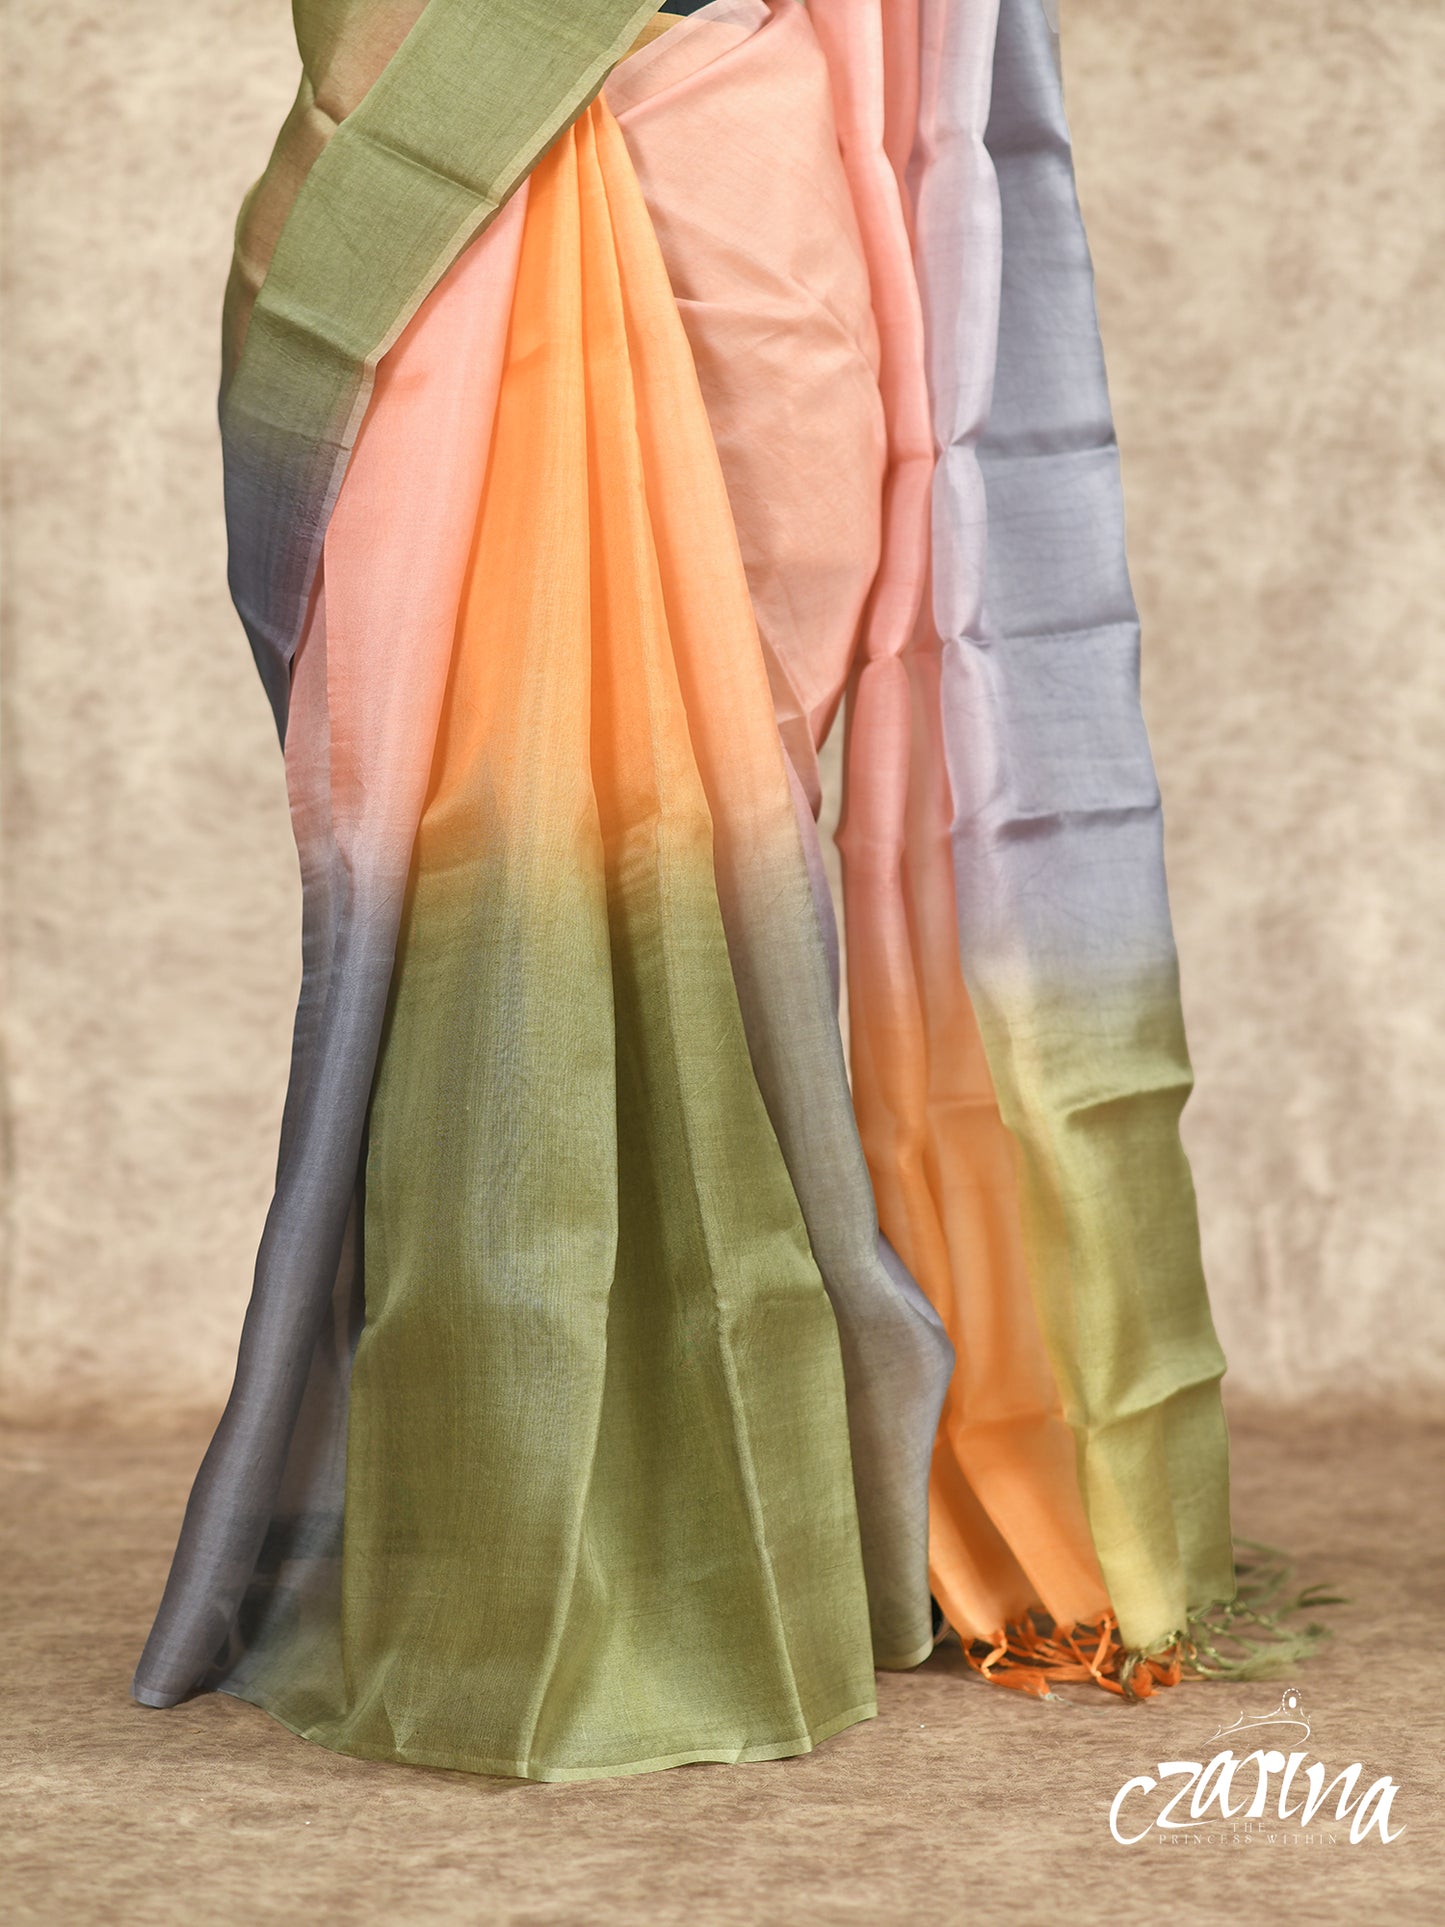 FADED BLEND PEACH PINK OLIVE GREEN, BLUE SHADES WITH BLUE SHADED ZARI DOTTED ORGANZA SILK SAREE